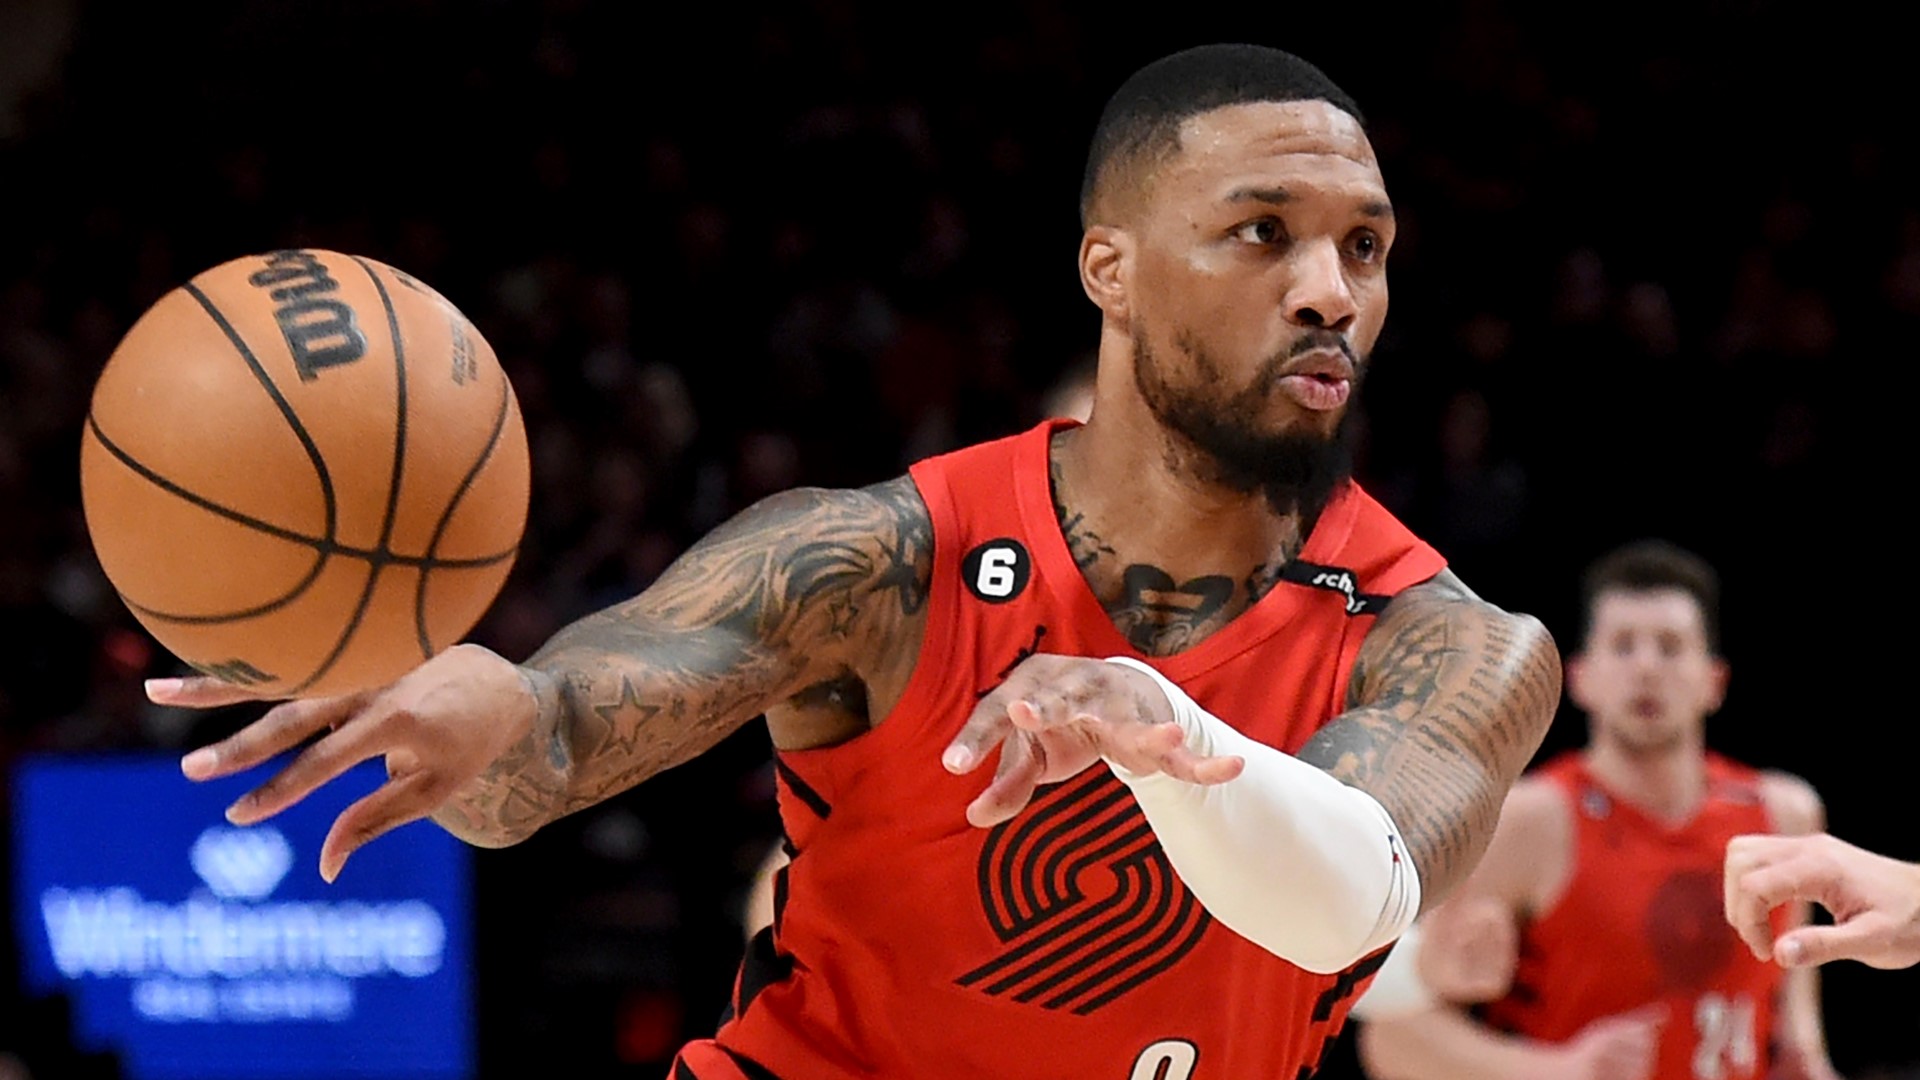 Damian Lillard thanked fans, teammates and those who impacted his life over the years. He's headed to the Milwaukee Bucks, part of a 3-team deal.